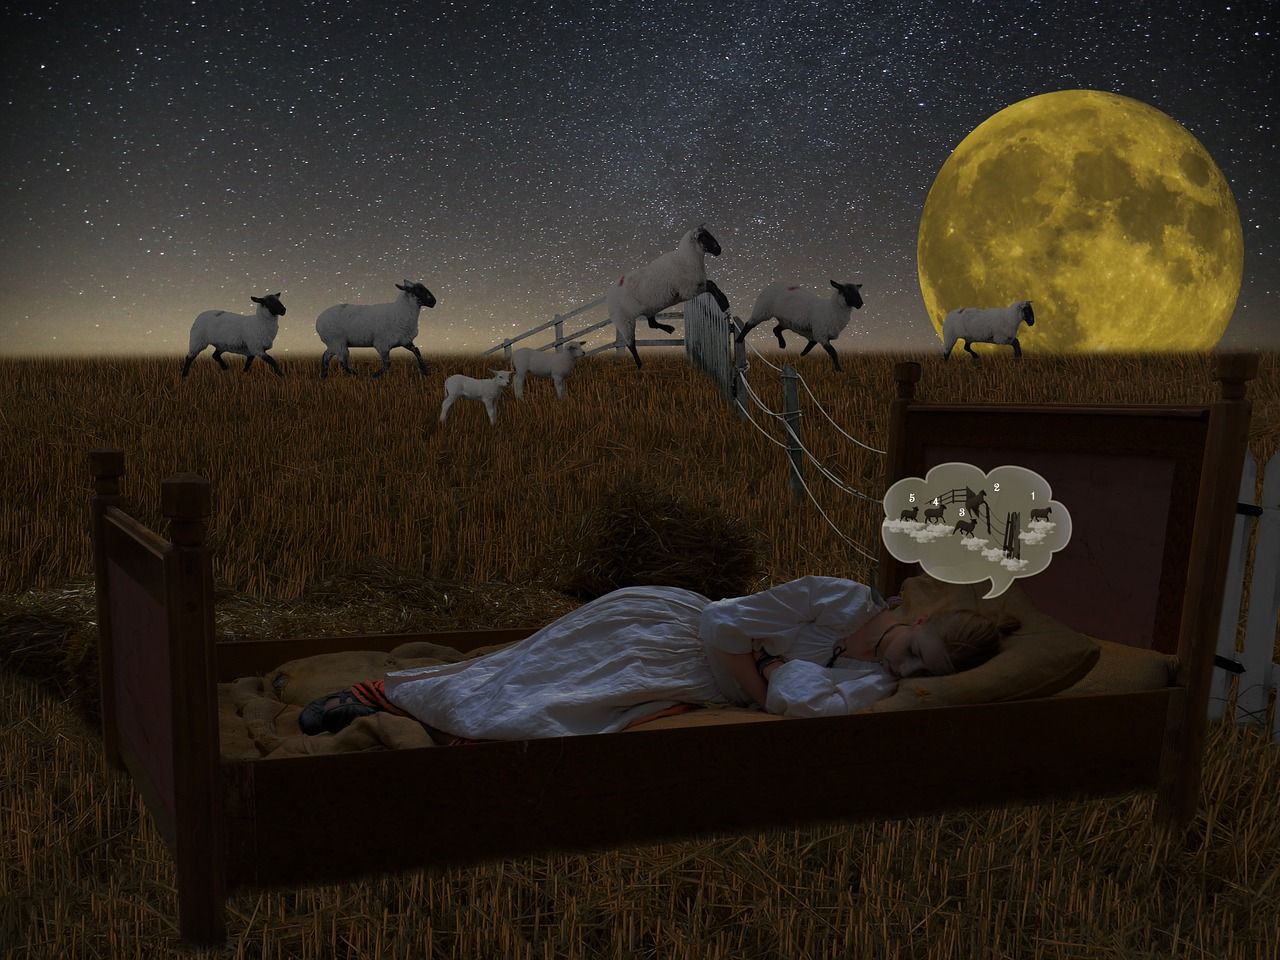 How to Get Rid of Insomnia in a Natural Way